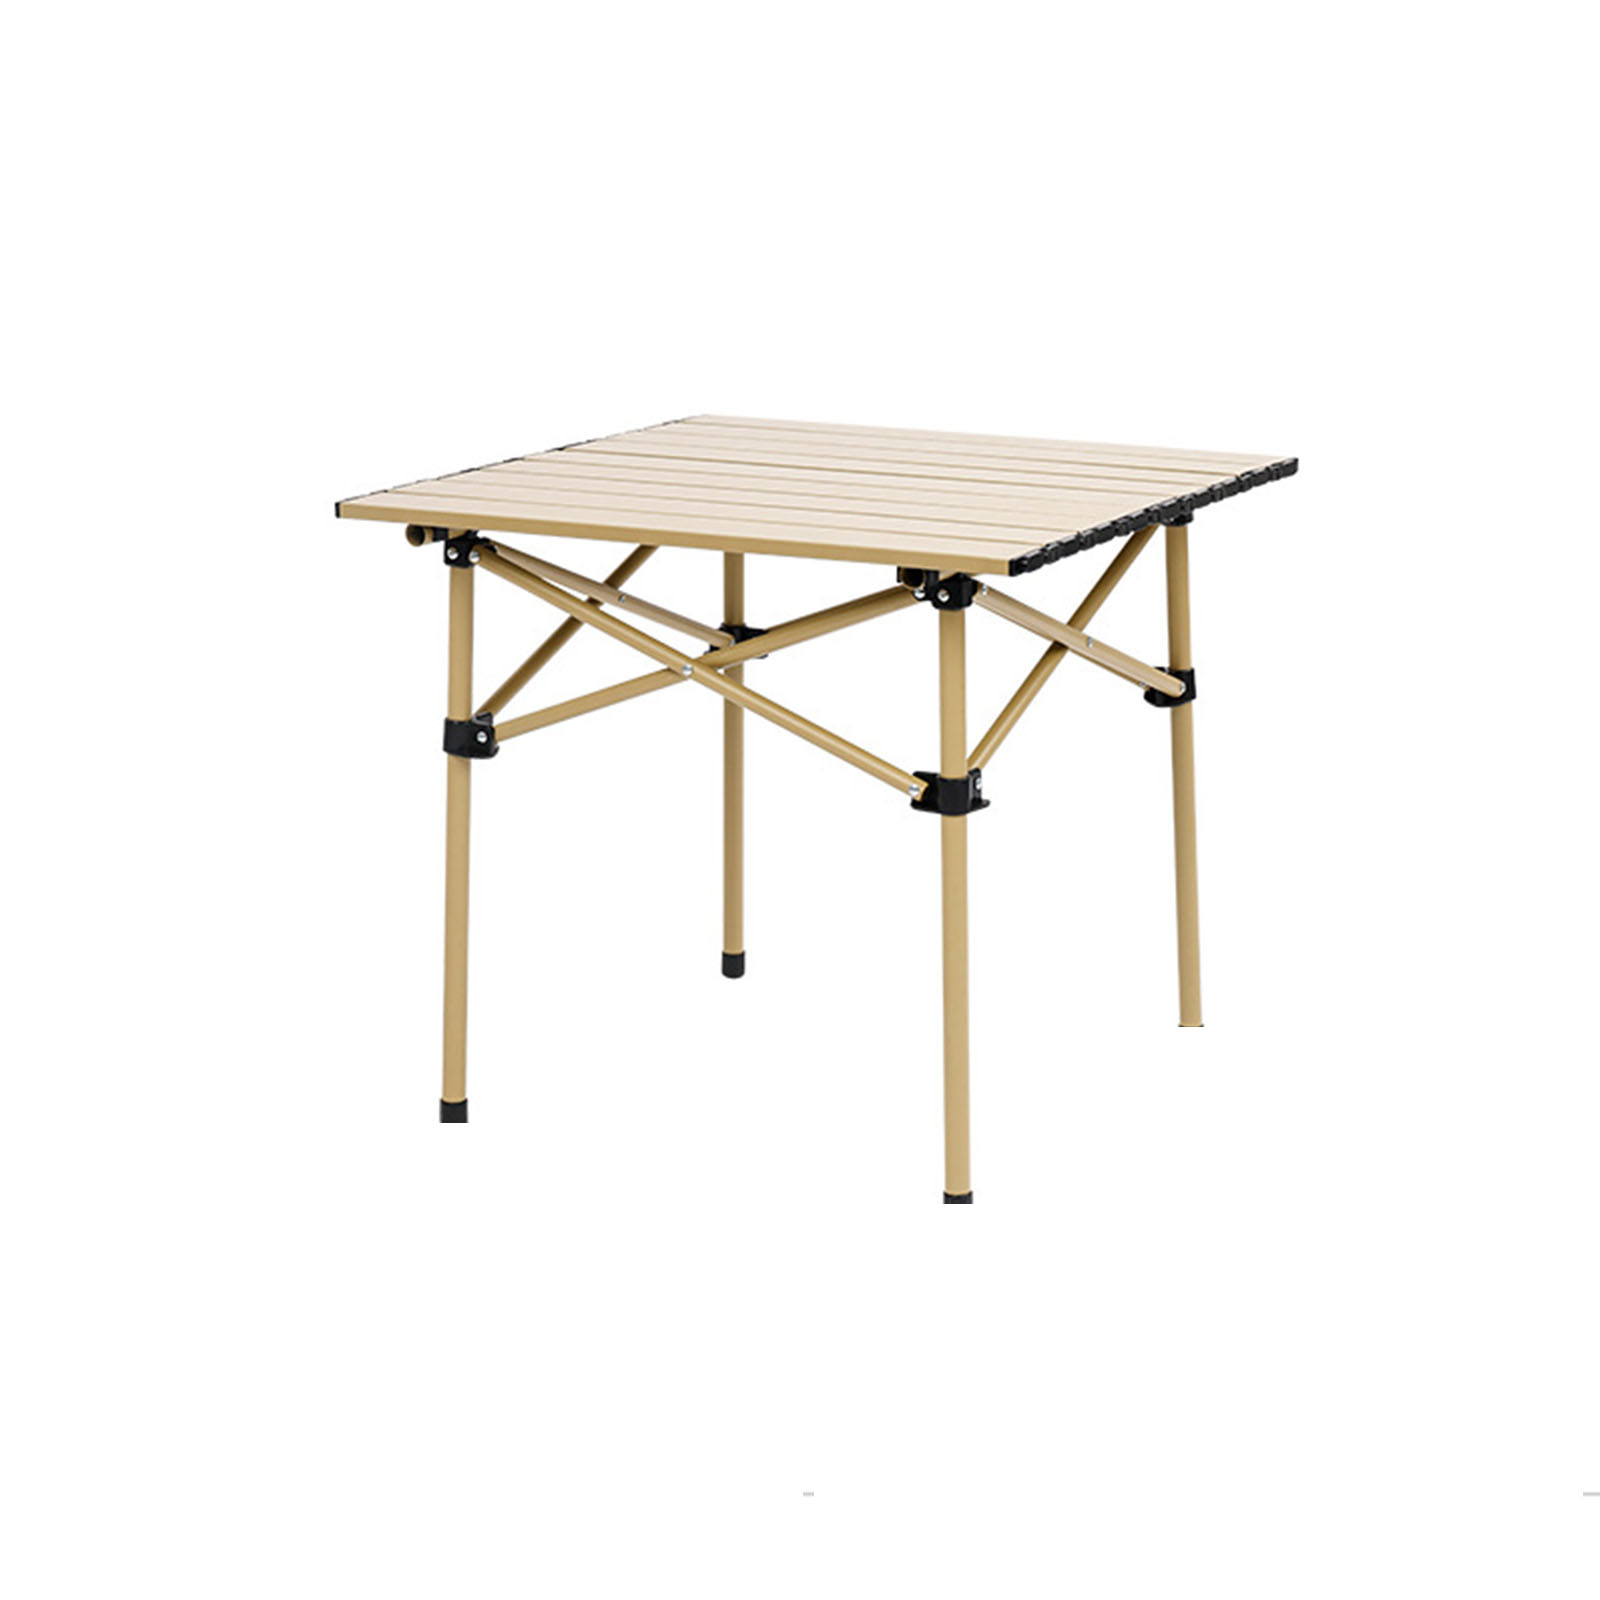 Portable folding table and chair combination for outdoor camping casual picnic egg roll table